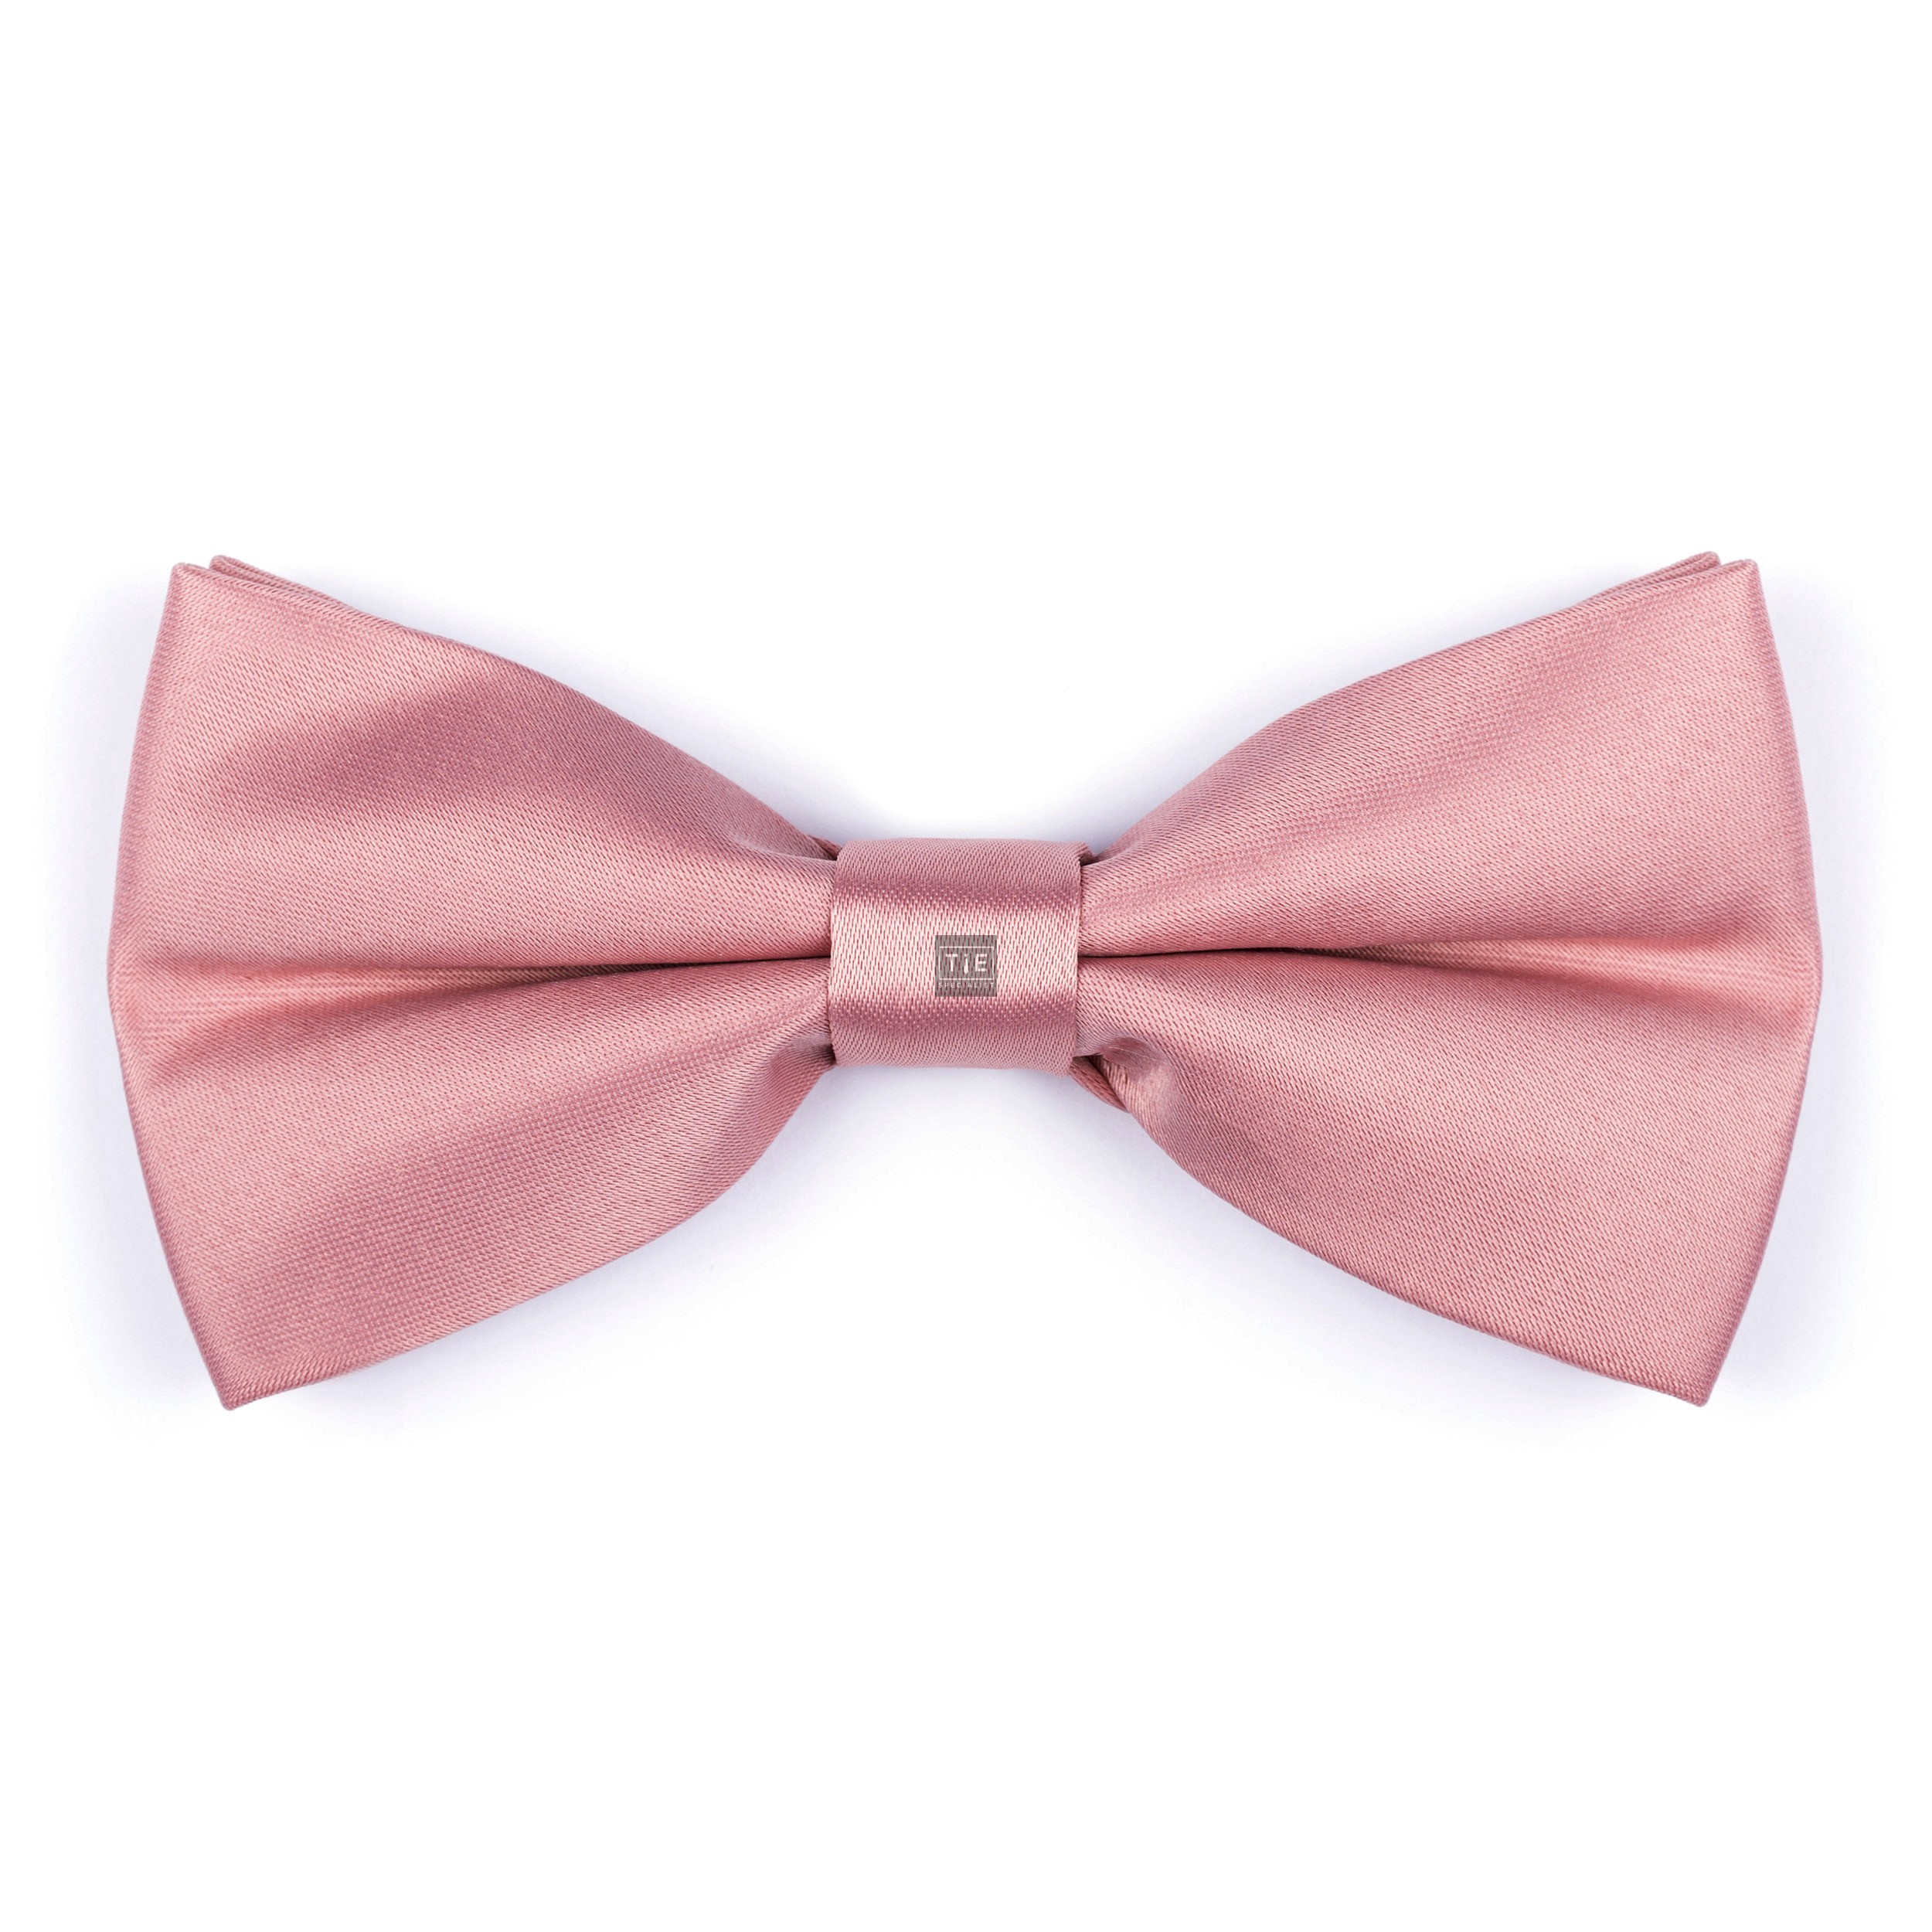 Rose Pink Sun Kiss Bow Tie - Plain Pink Pre-Tied Wedding Bow Tie